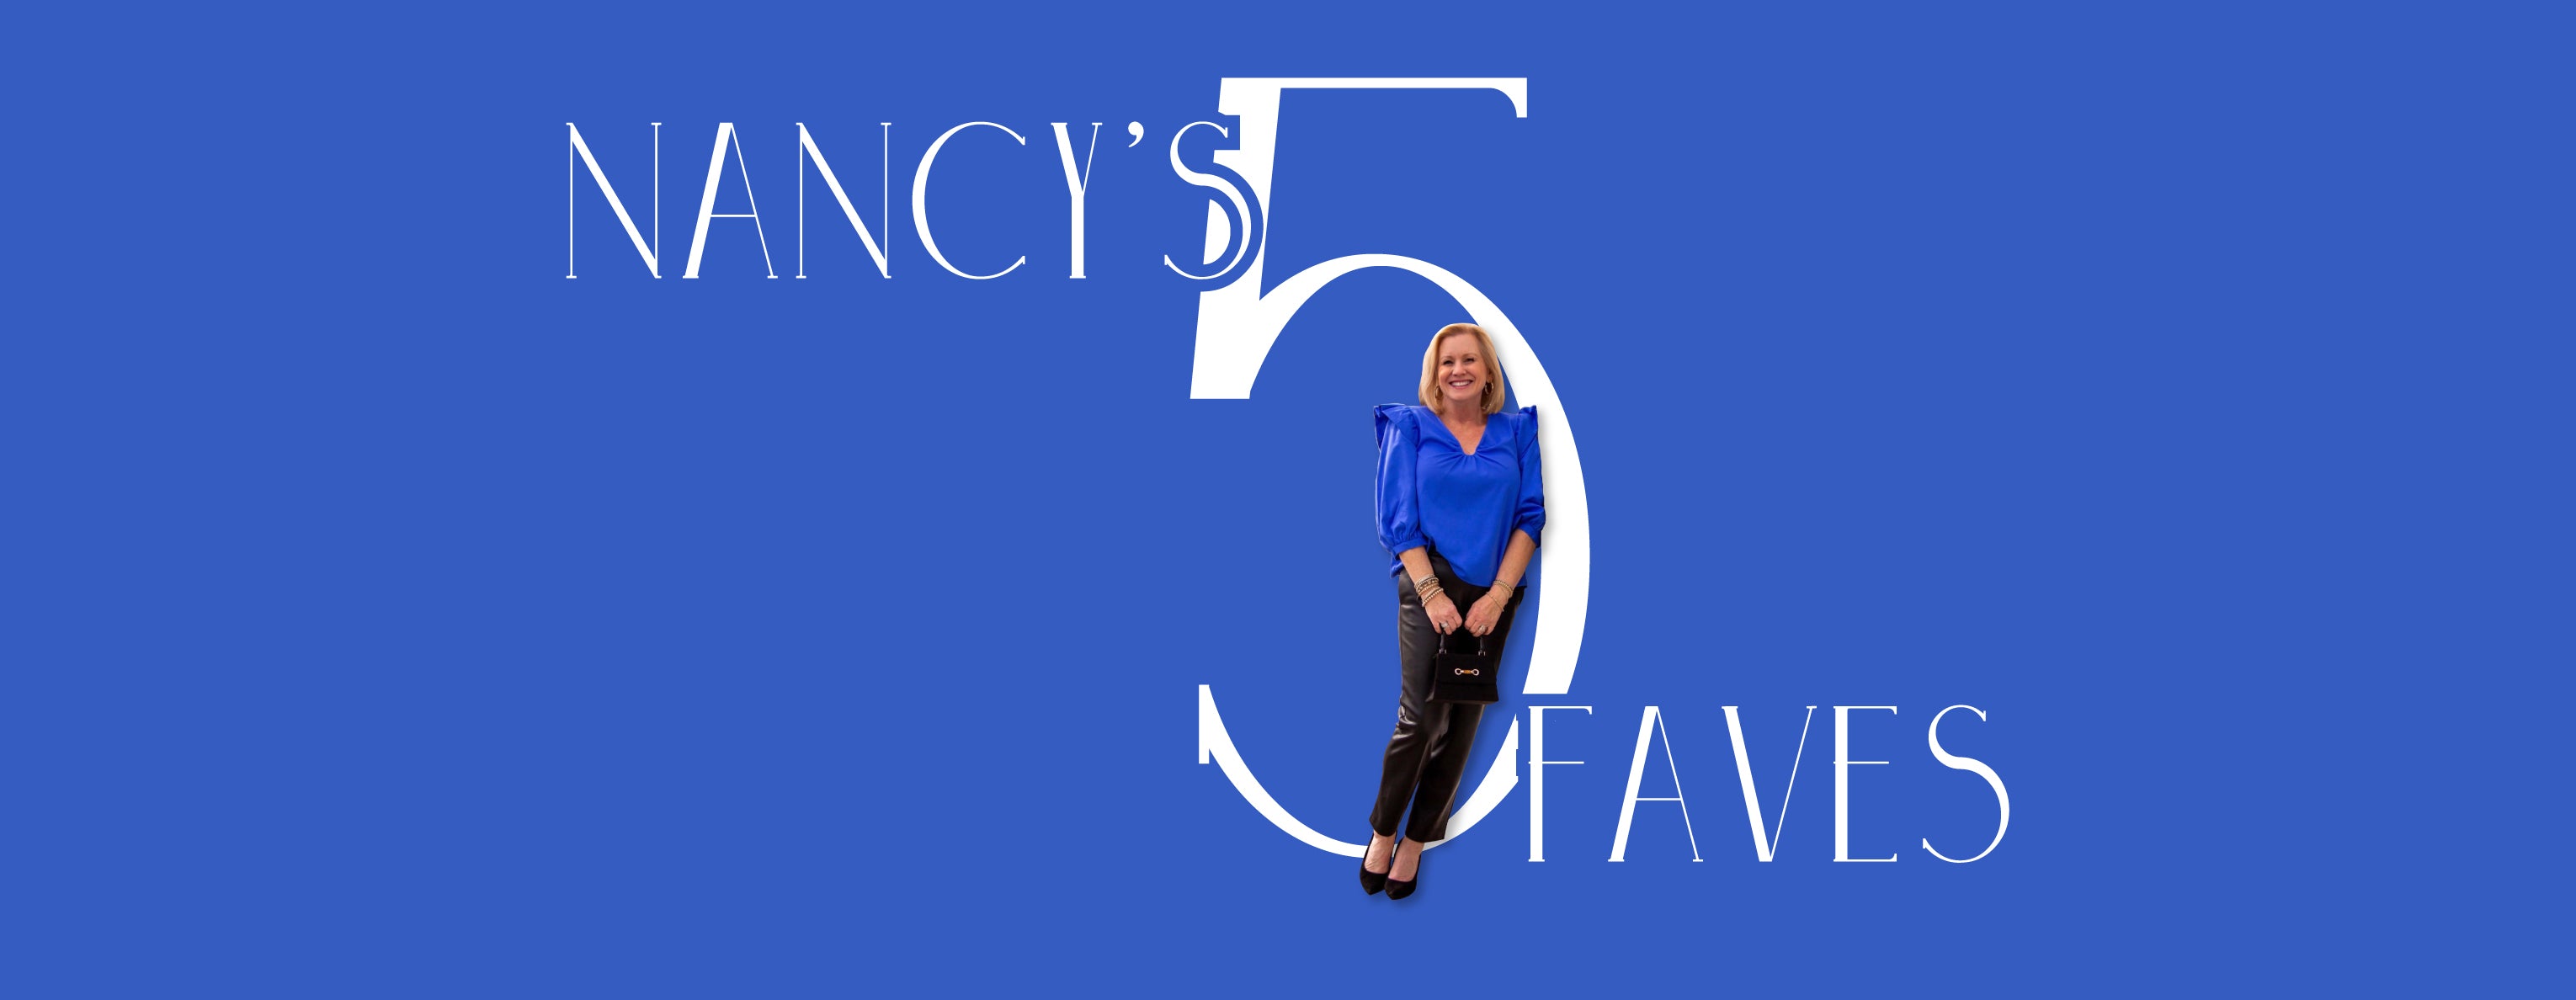 Introducing Nancy's Five Faves